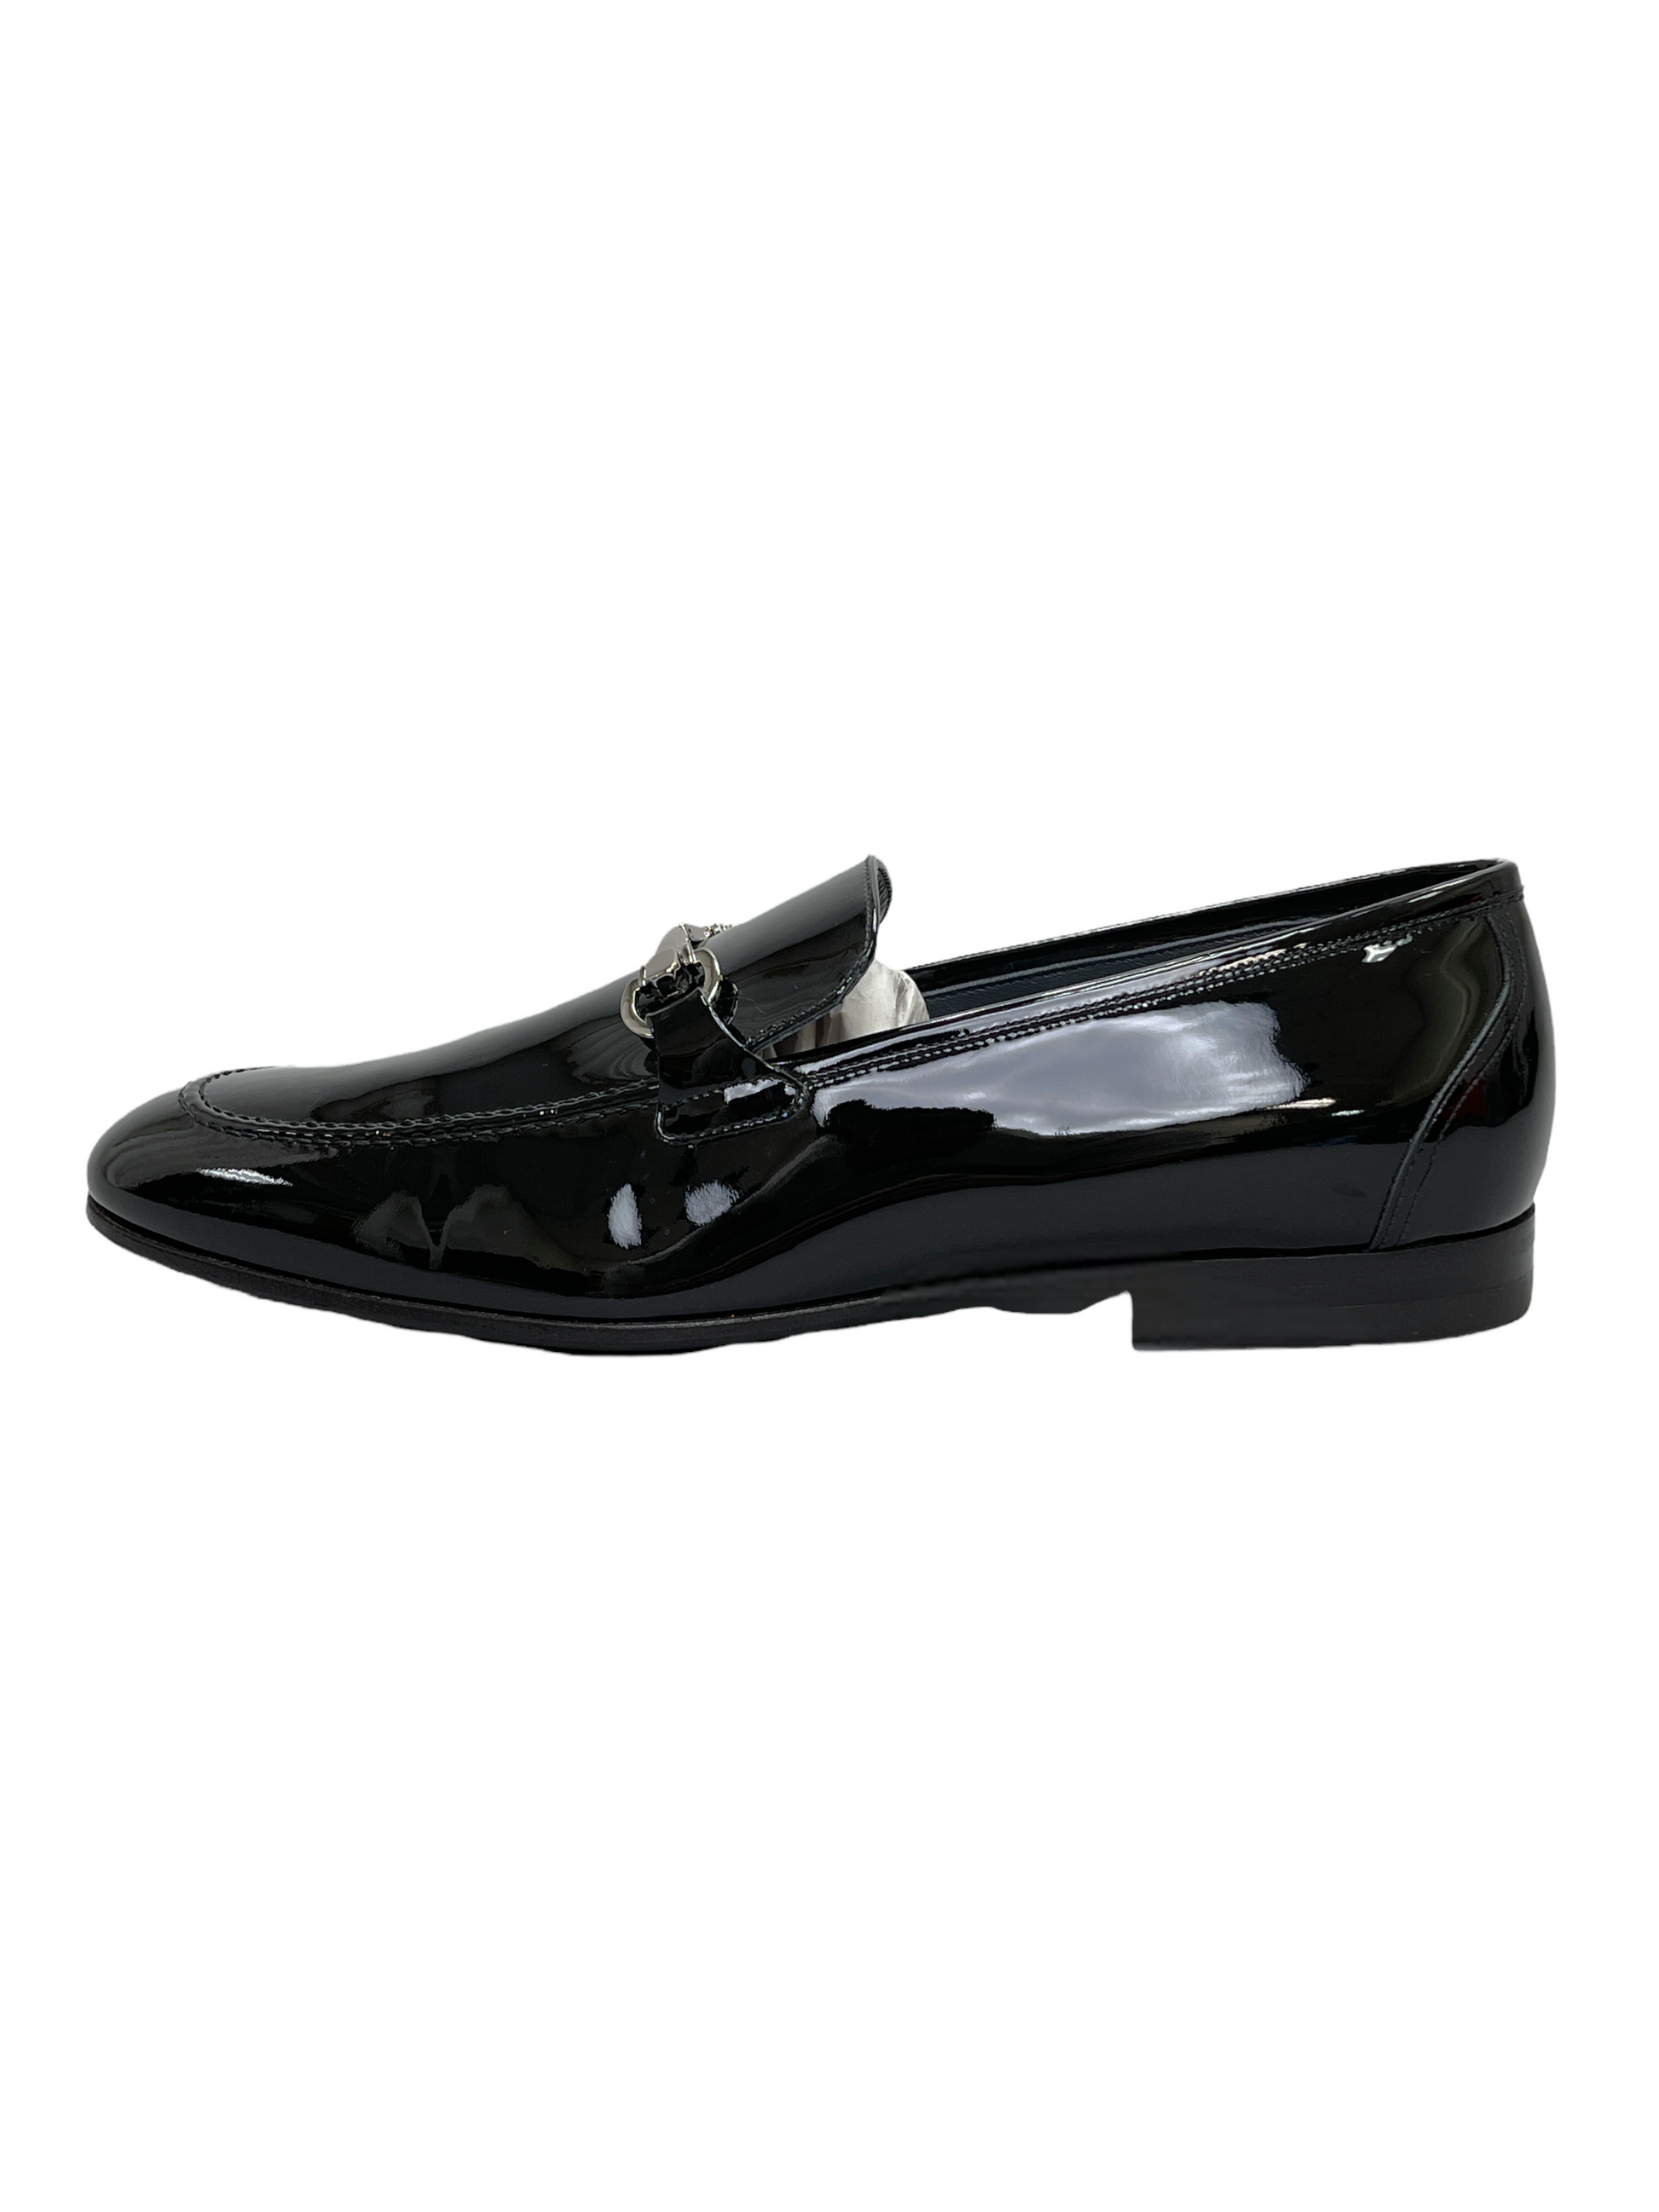 Monte Rosso Brianza Black Leather Smoking Loafers 8 D US - Genuine Design Luxury Consignment for Men. Based in Calgary, Alberta, Canada.